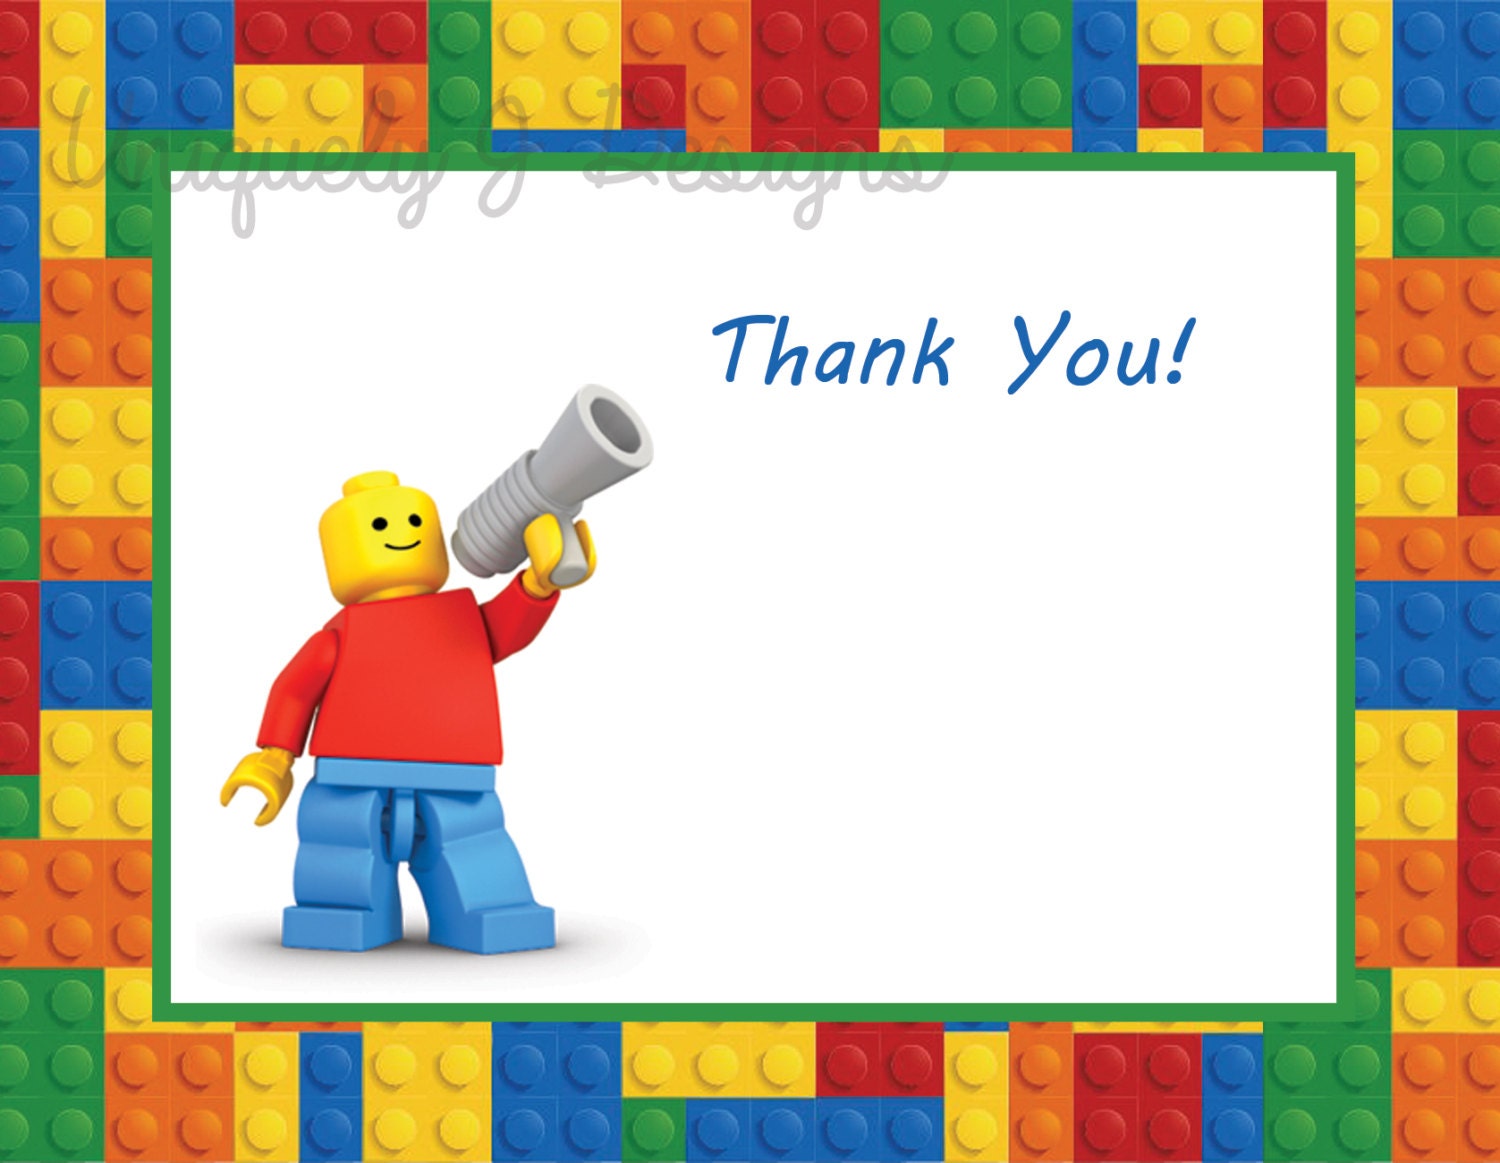 Lego Thank You Cards Instant Download By UniquelyJDesigns On Etsy